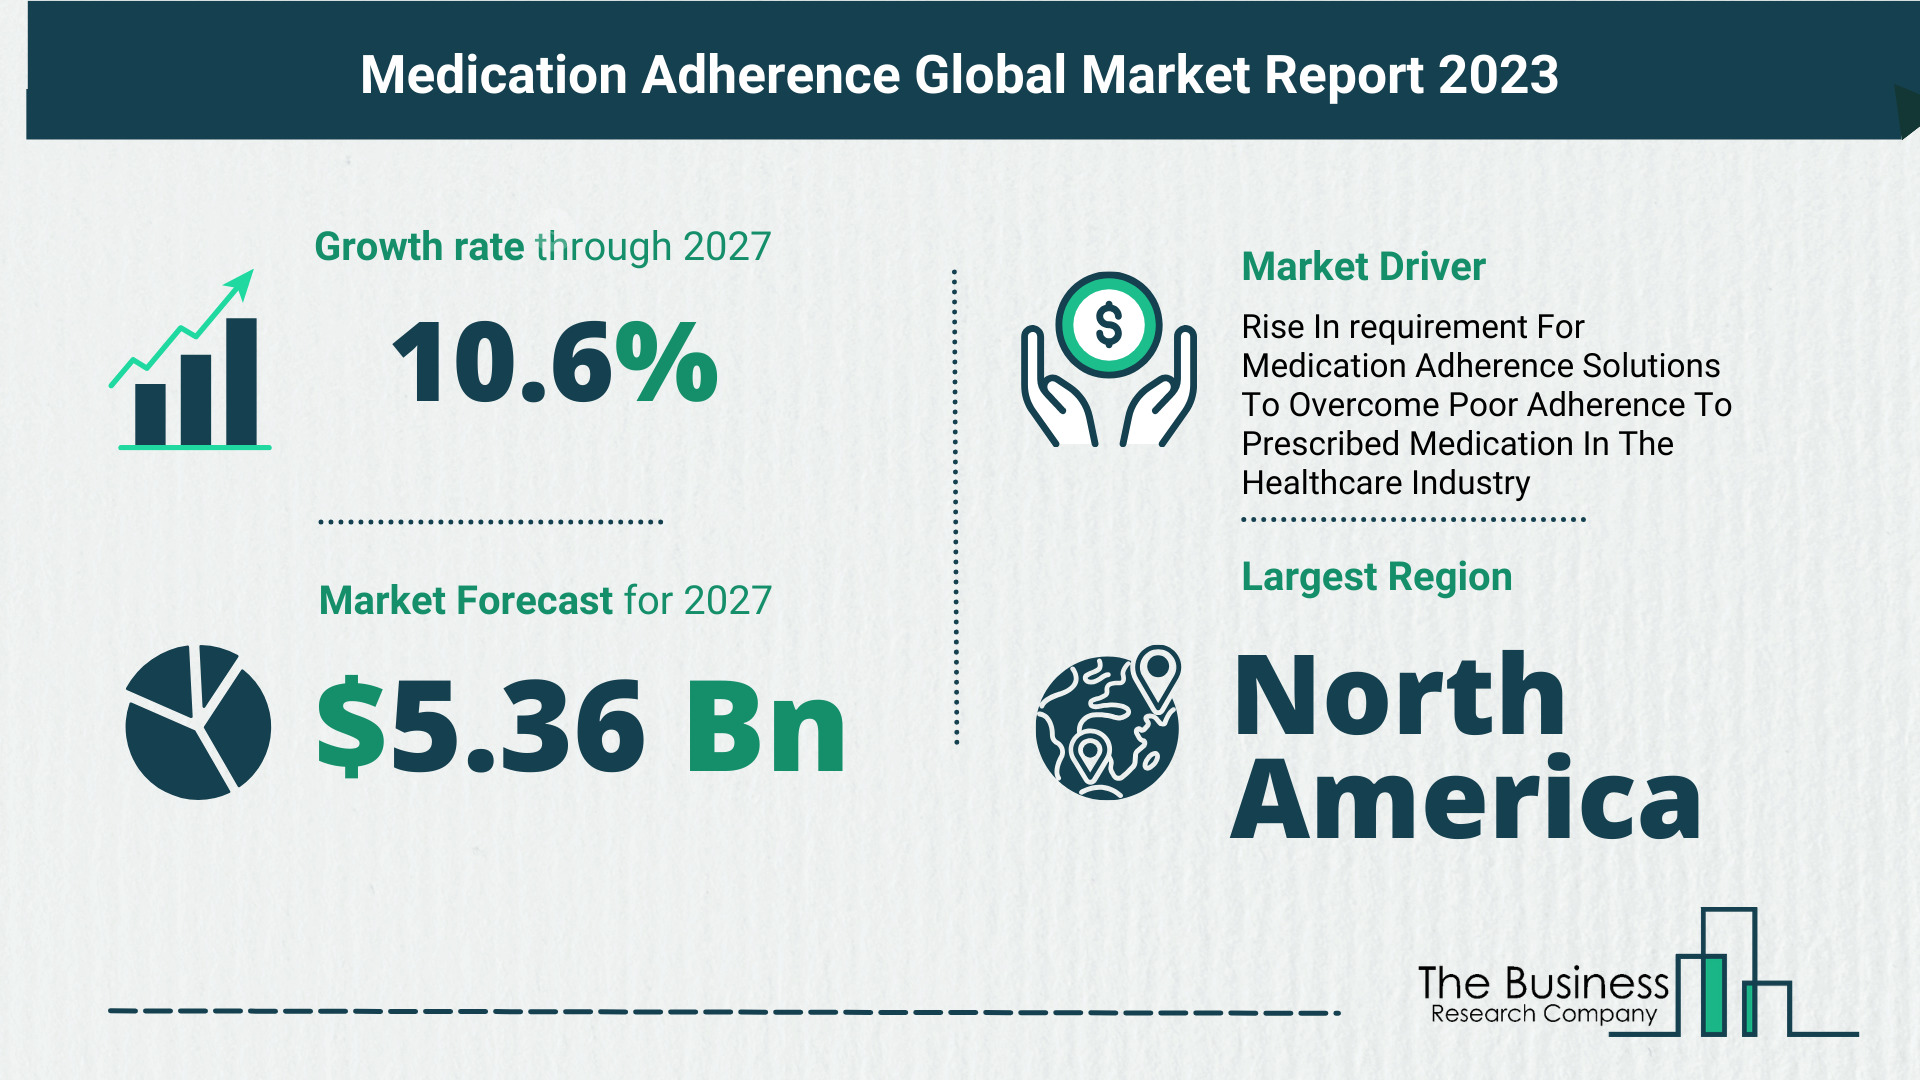 Top 5 Insights From The Medication Adherence Market Report 2023